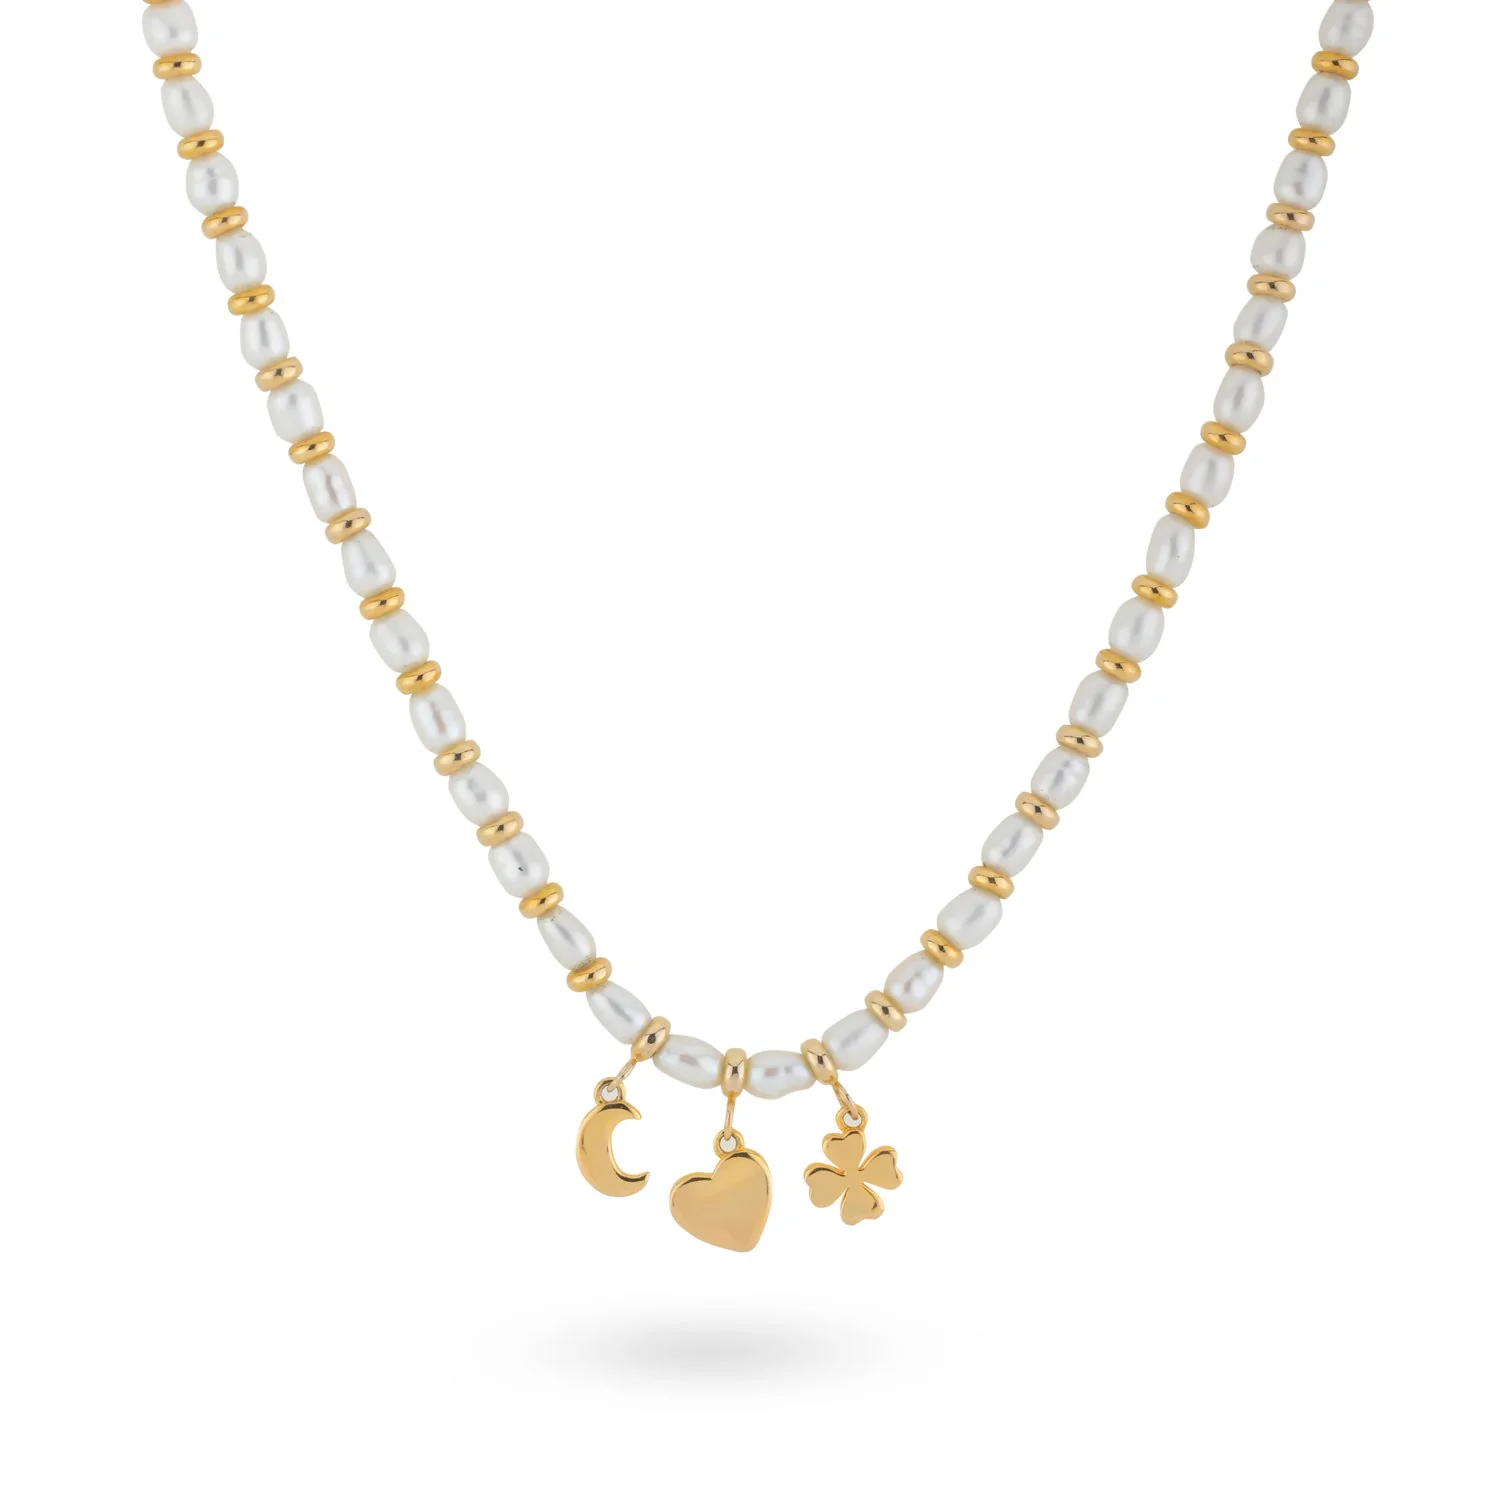 24Kae Gold Bead & Pearl Necklace with Charms